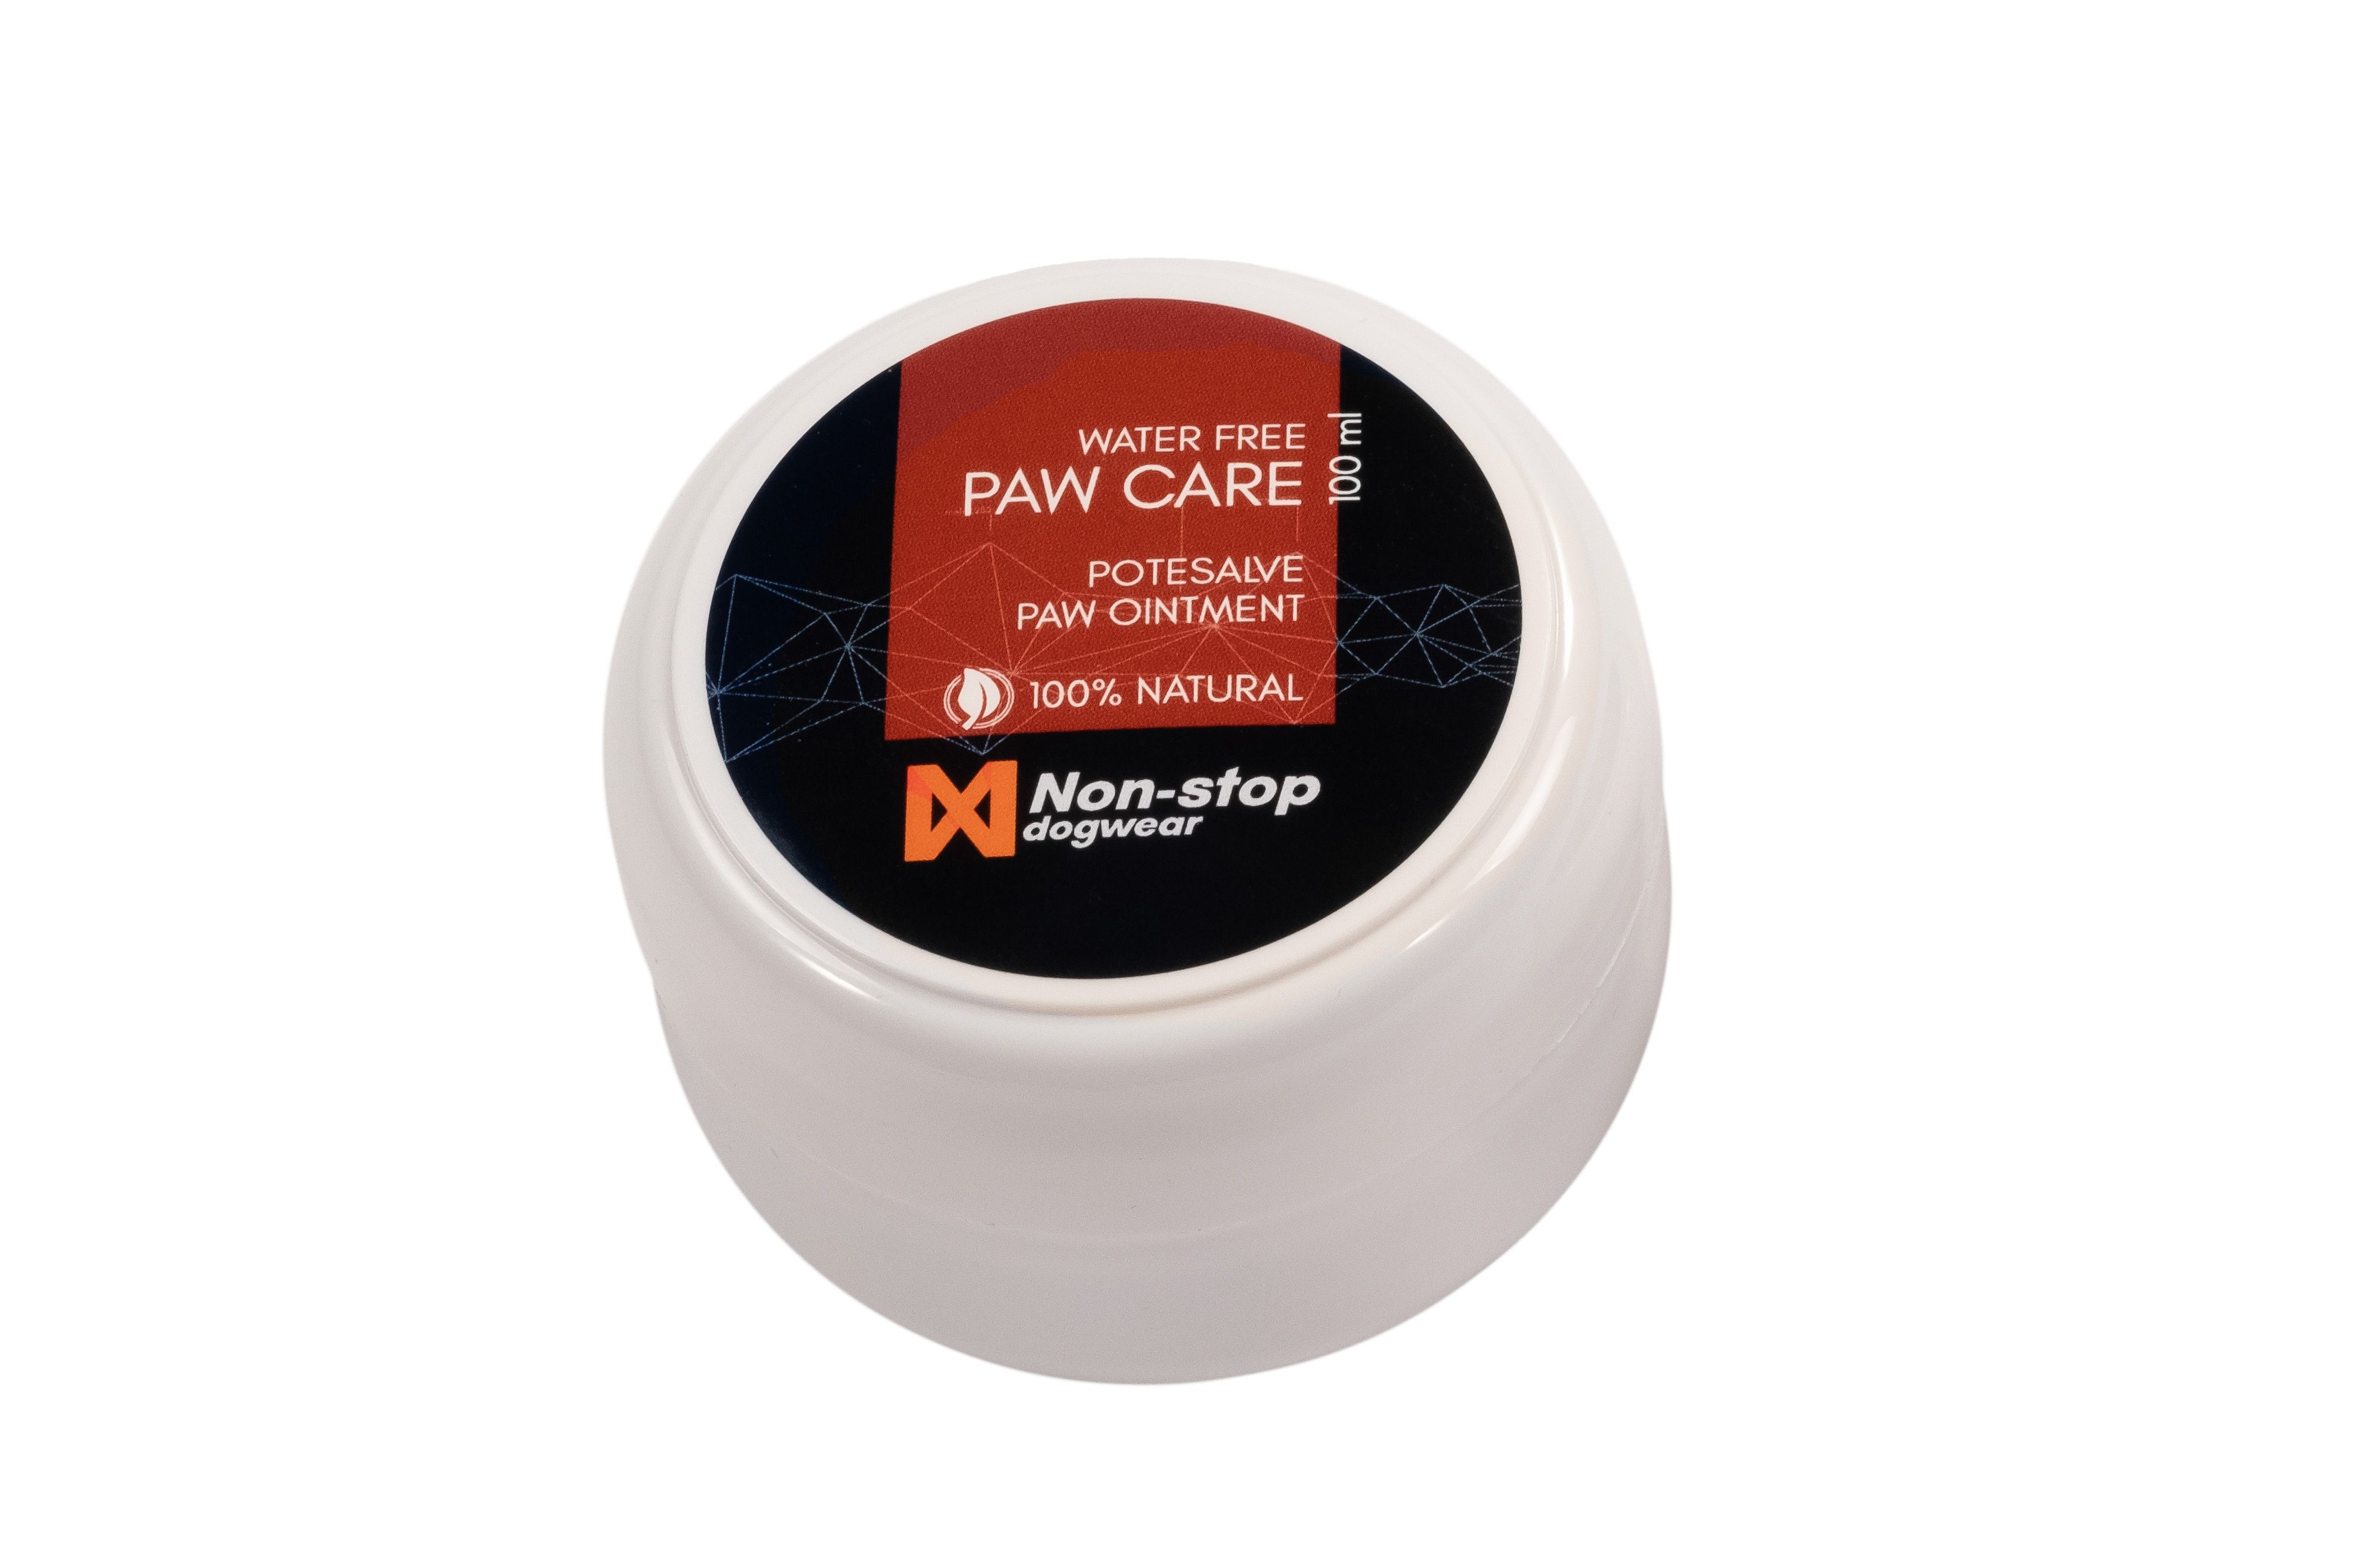 Non-Stop Dogwear Paw Care